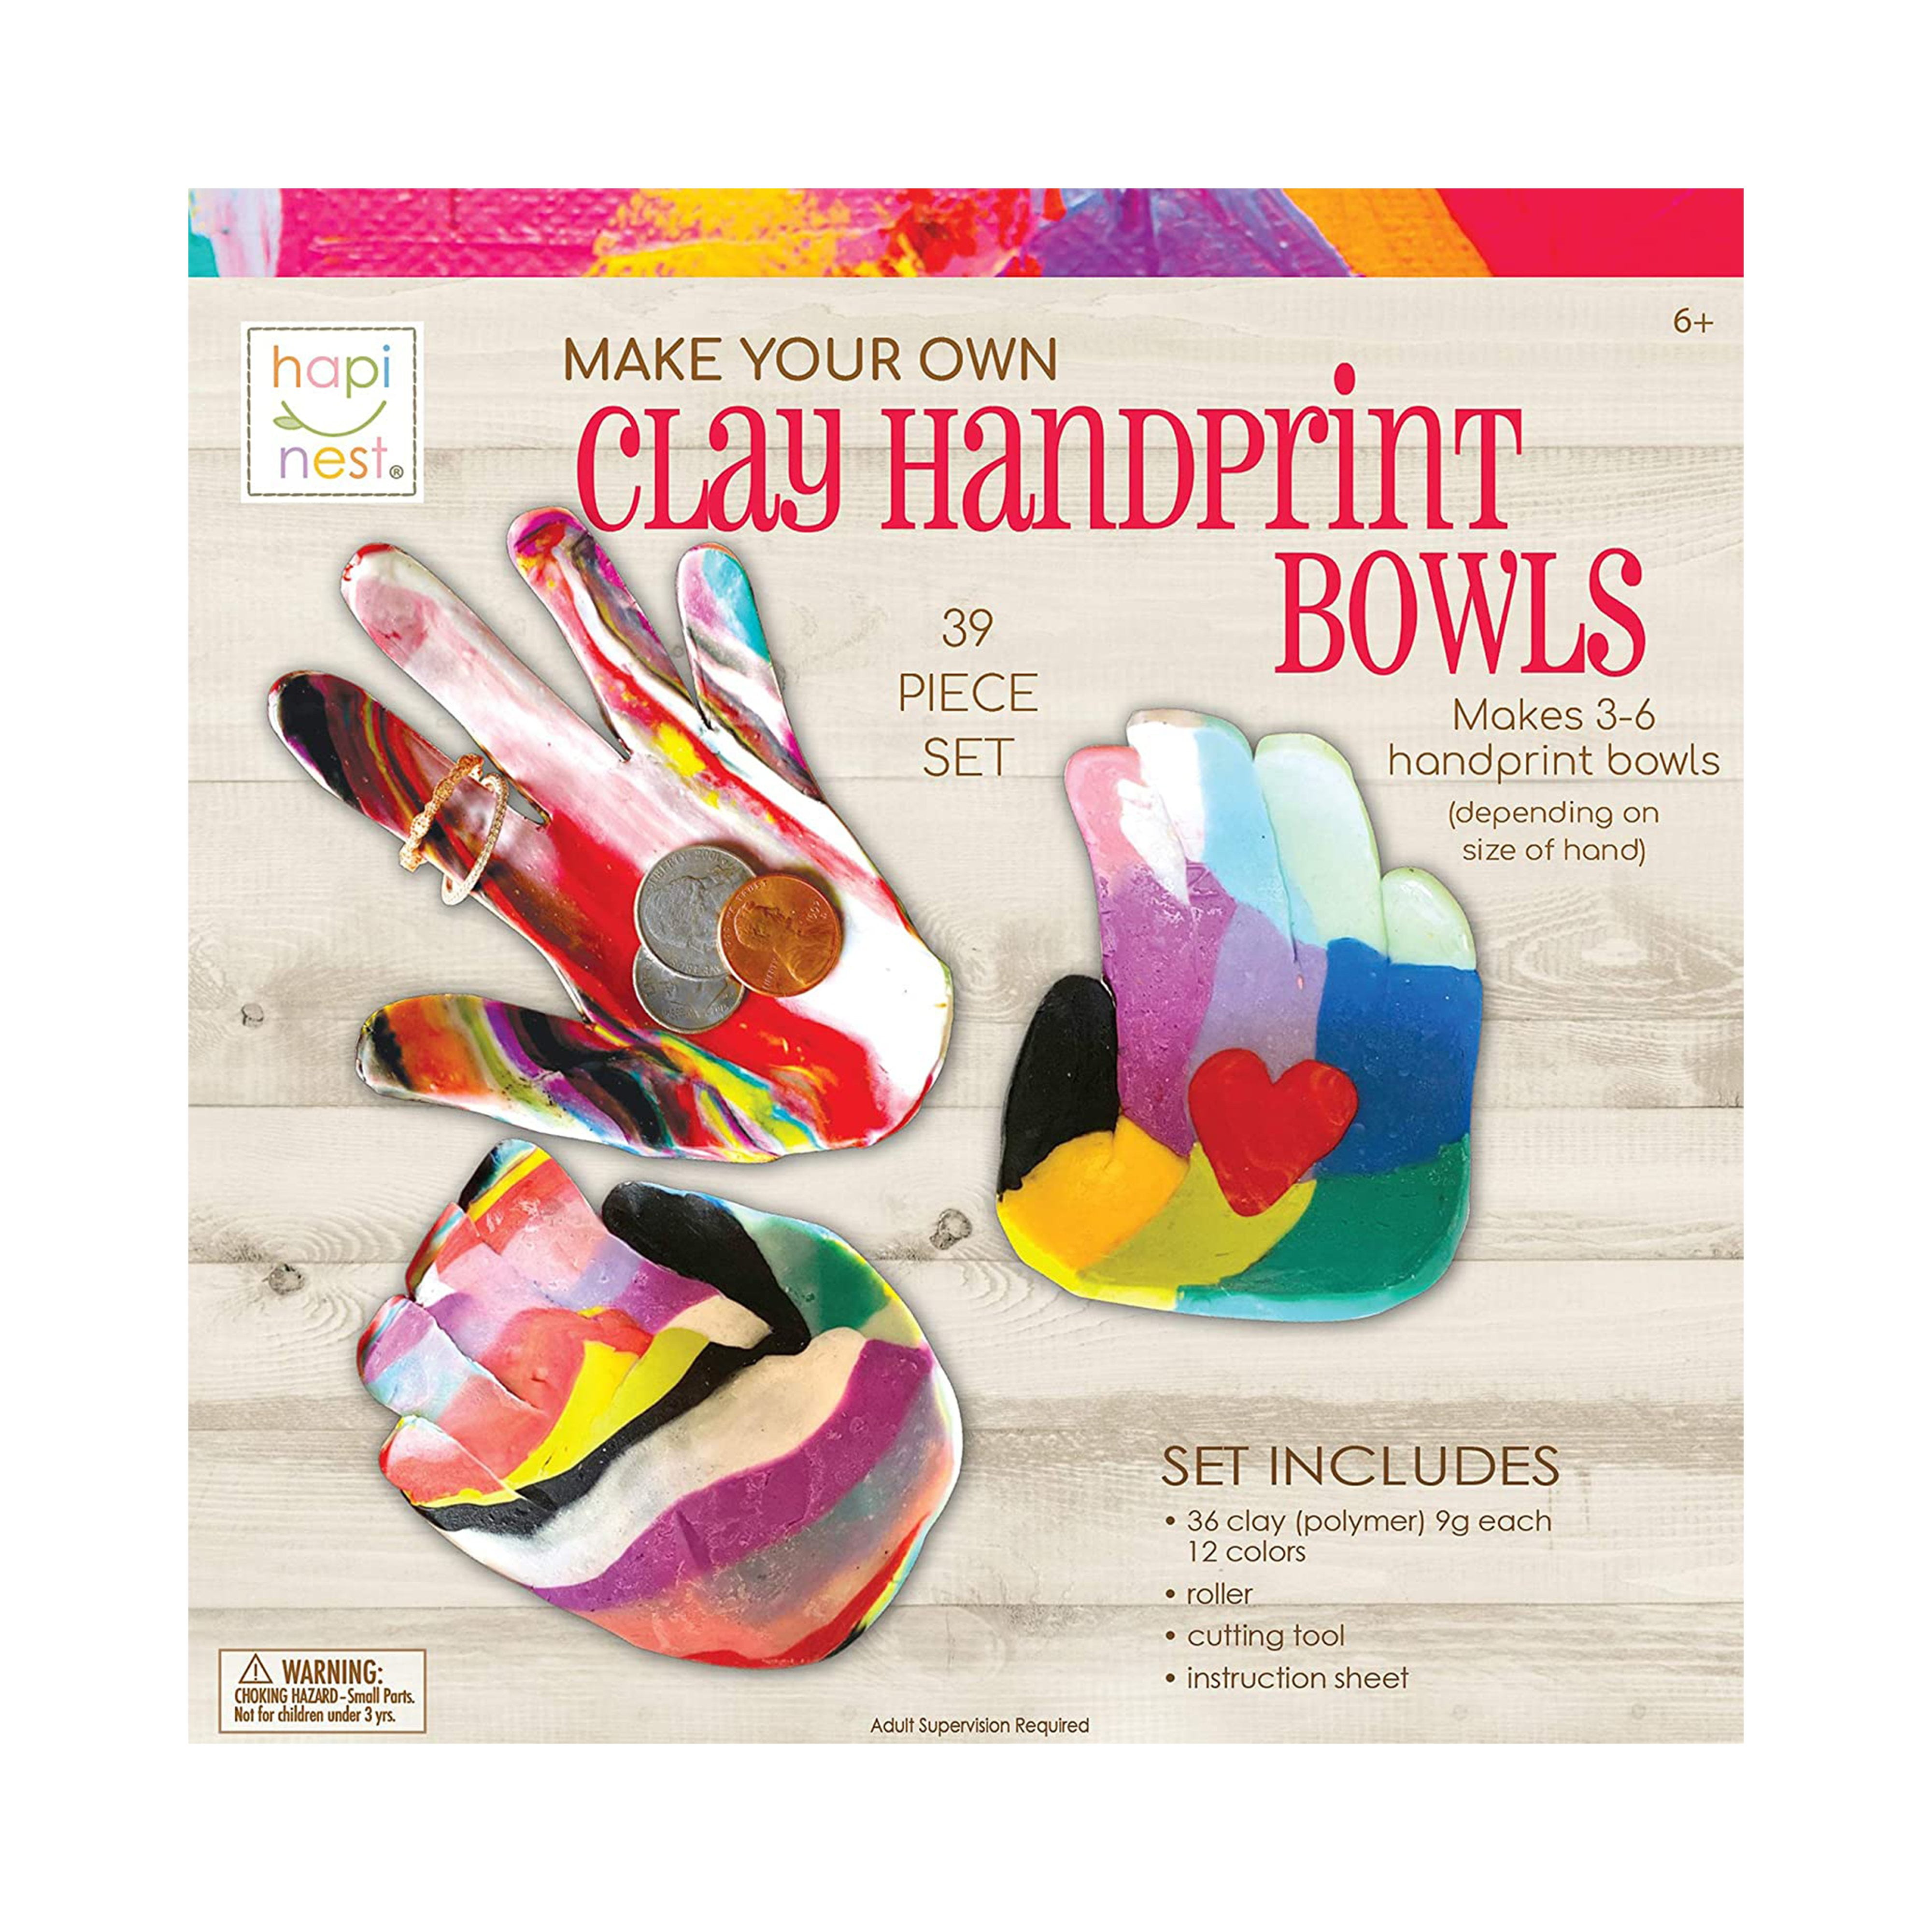  Titoclar Arts and Crafts for Kids Girls Ages 8-12 6-8 4-8 4-6 -  Make Your Own Clay Handprint Bowls,Halloween Crafts Christmas Party  Birthday Gifts for 4 5 6 7 8 9 10 Year Old Girl (18 Colors) : Toys & Games